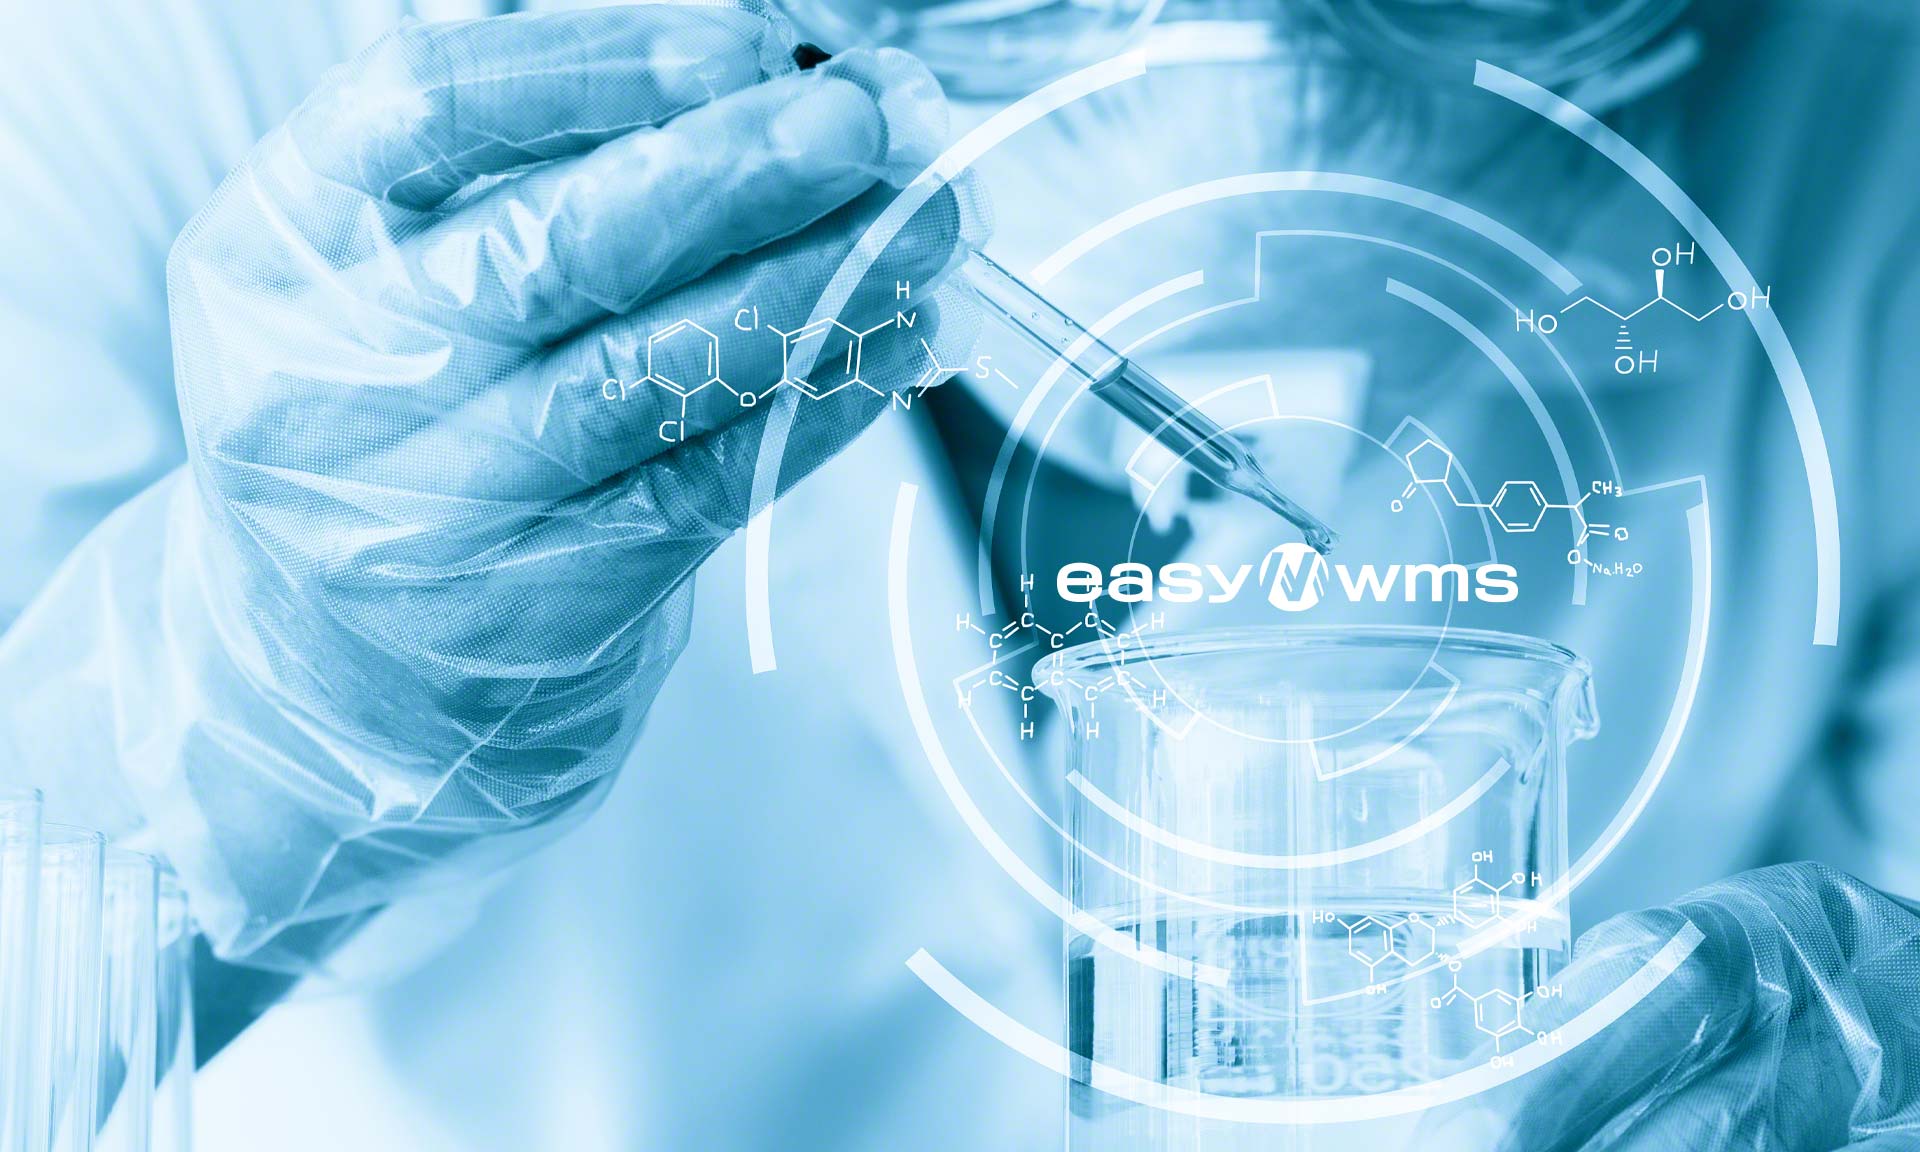 Nephron Pharmaceuticals will manage its medications with Easy WMS software